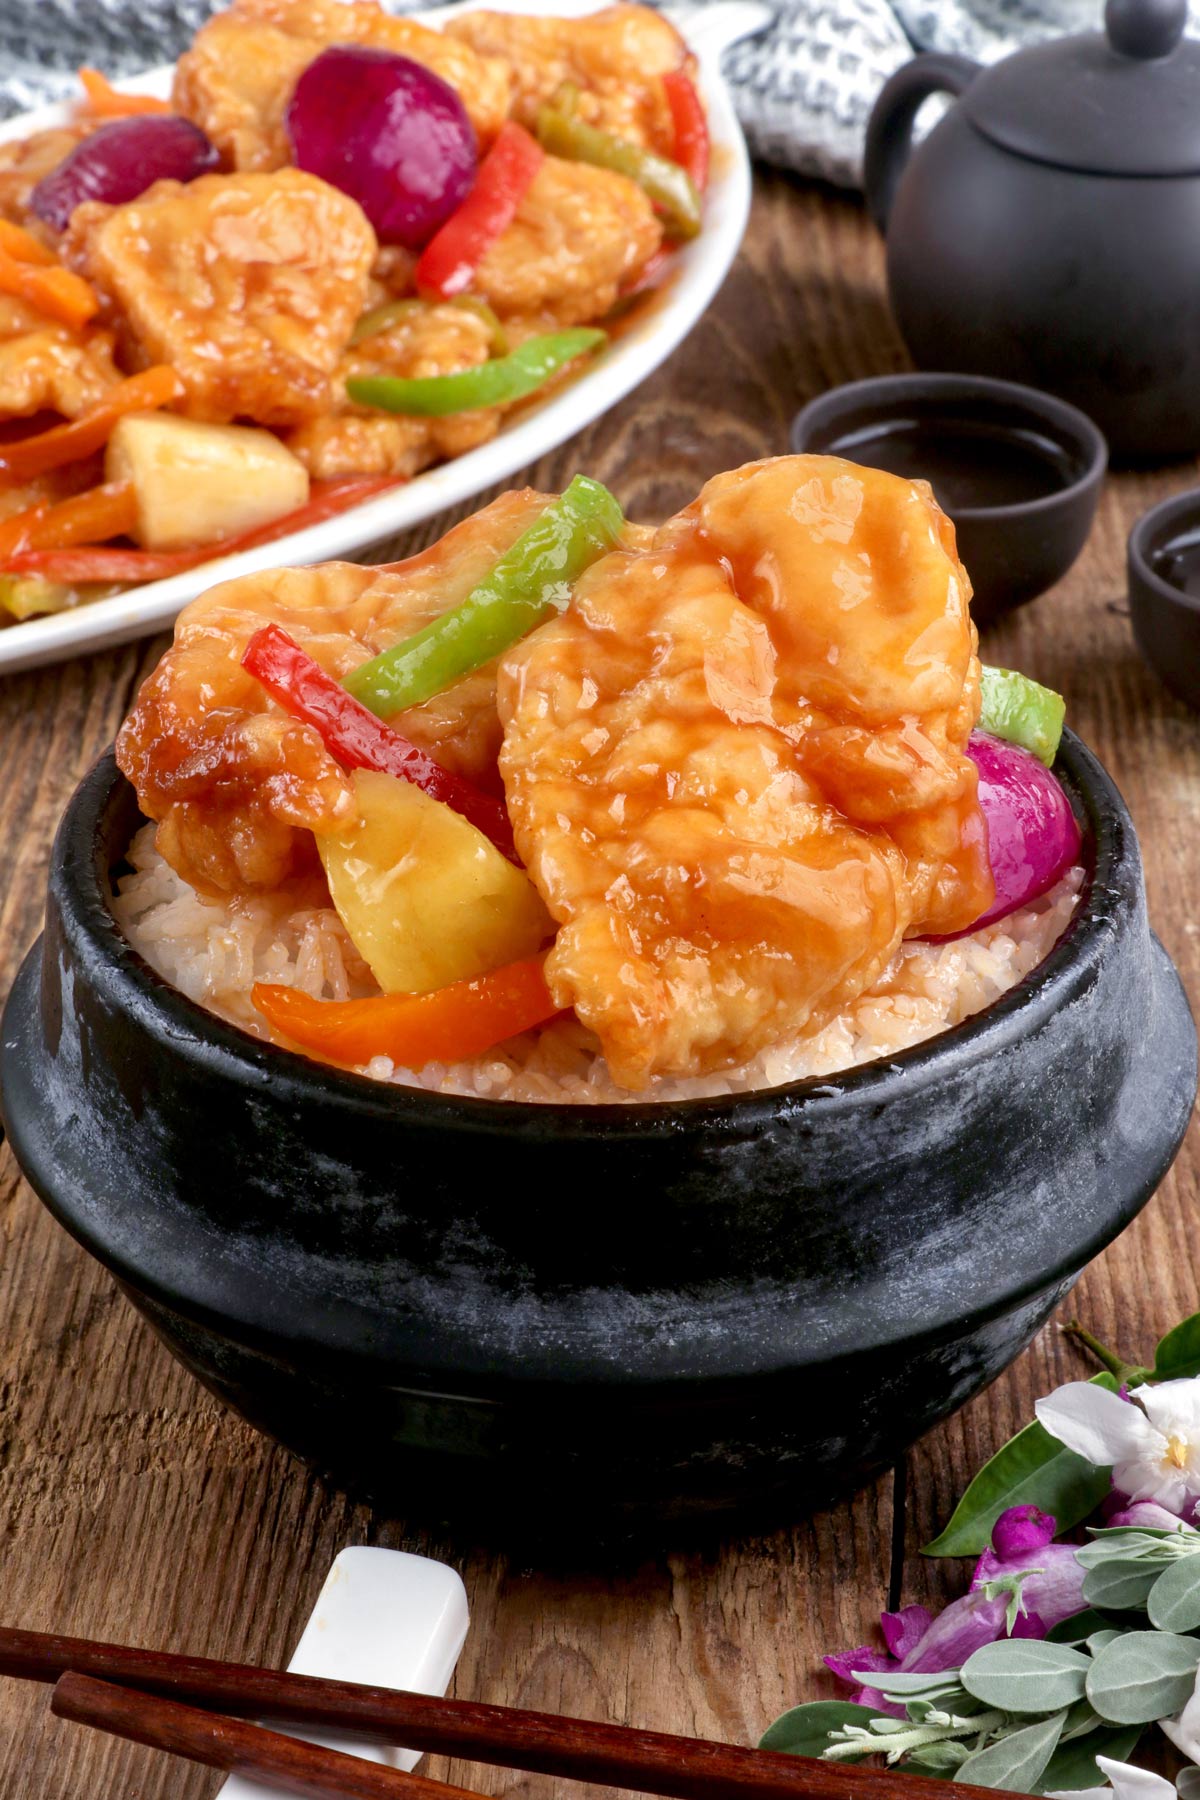 Freshly cooked sweet and sour fish fillet on top of a steamed white rice.